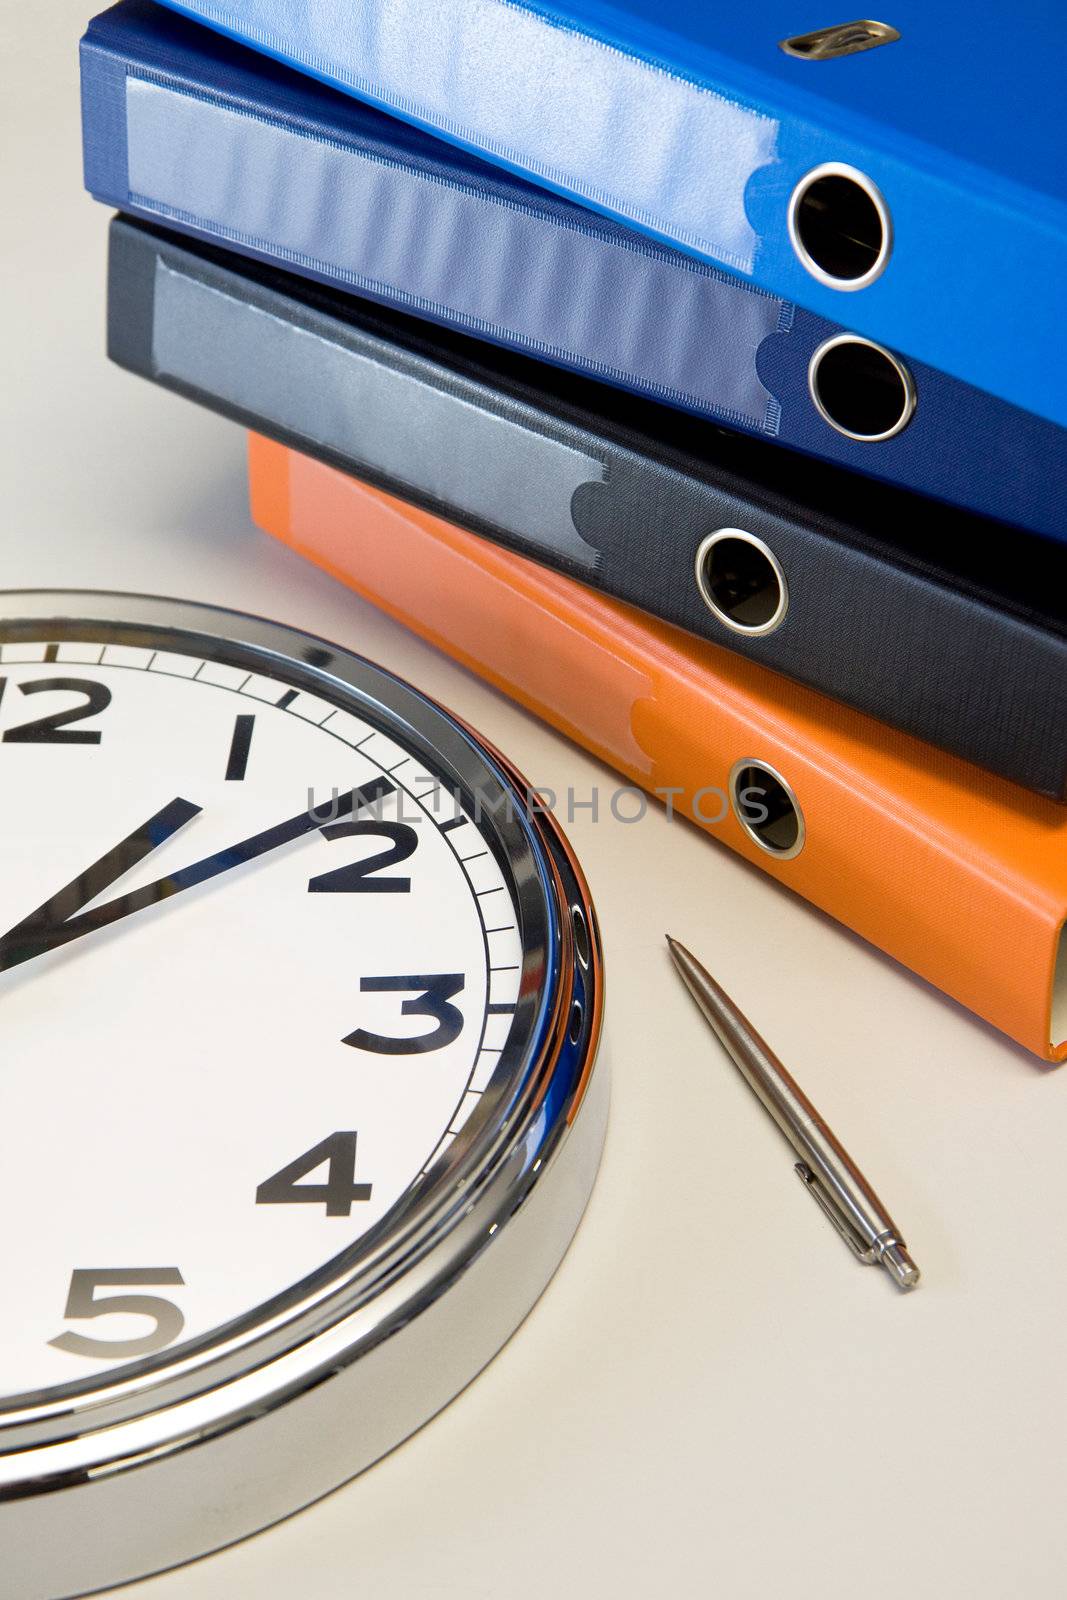 The clock and a pen in a table near colored binders in office, workplace